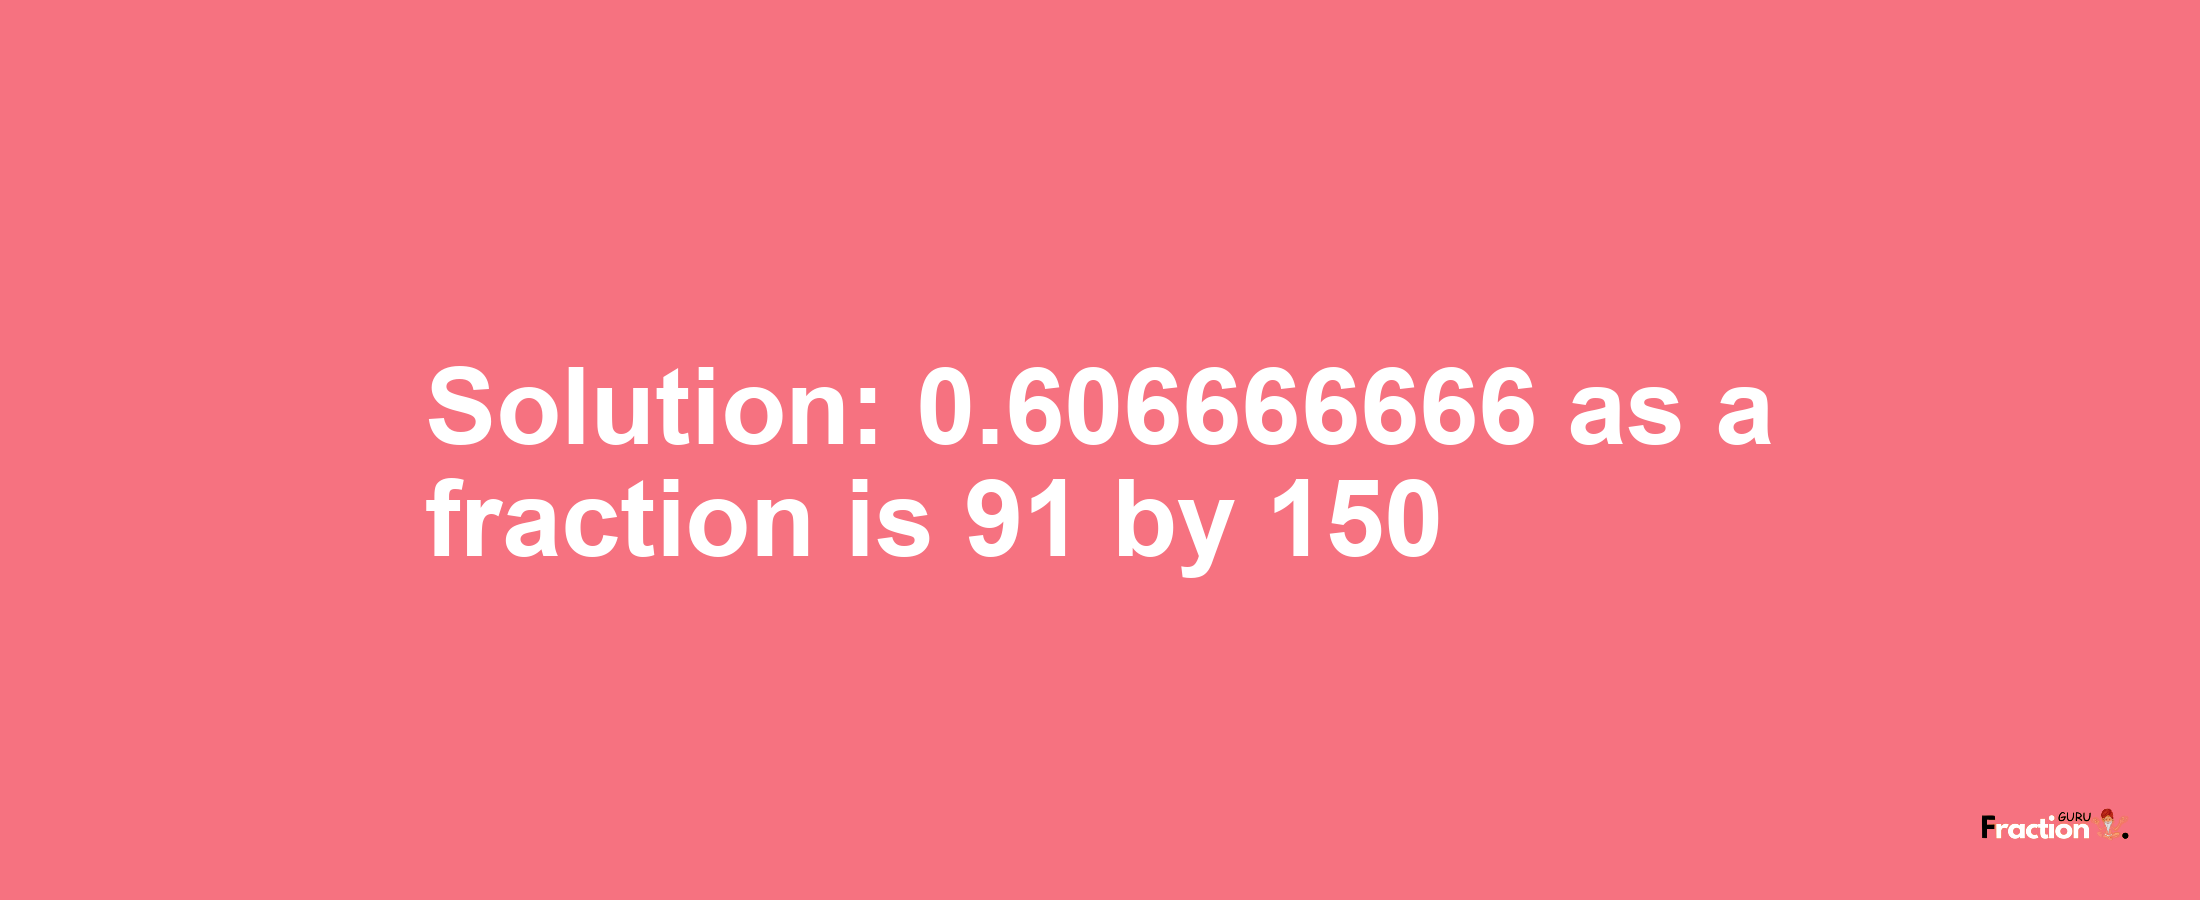 Solution:0.606666666 as a fraction is 91/150